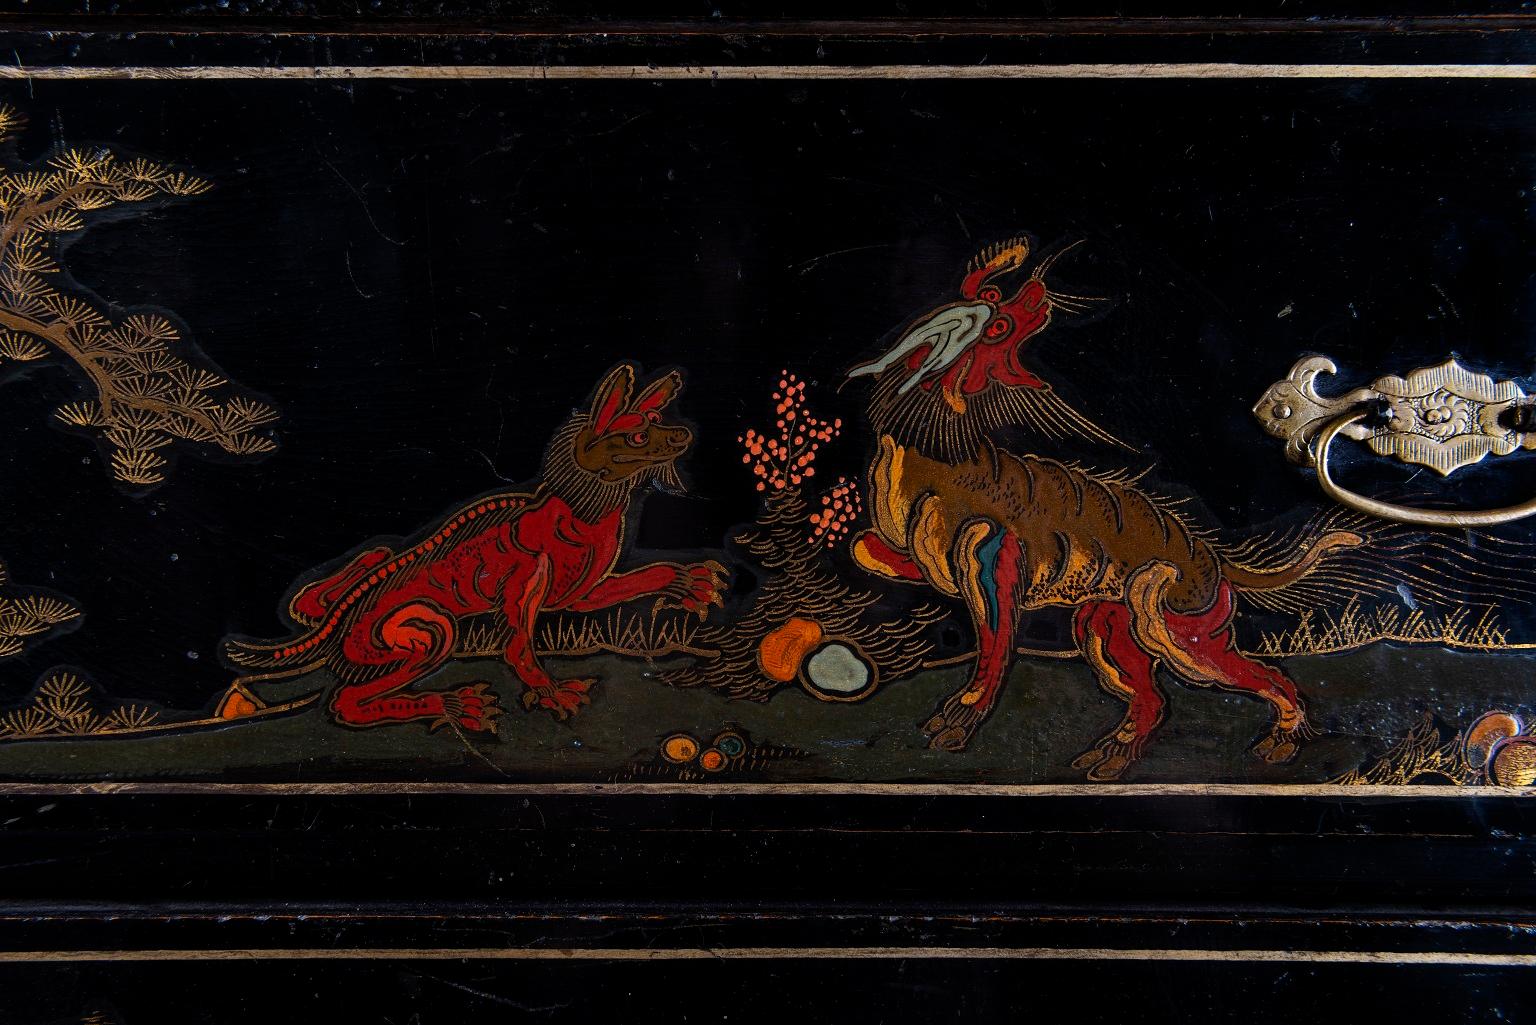 A Late 18th to Early 19th Century Large Chinoiserie Black Lacquer Cabinet In Good Condition For Sale In Armadale, Victoria